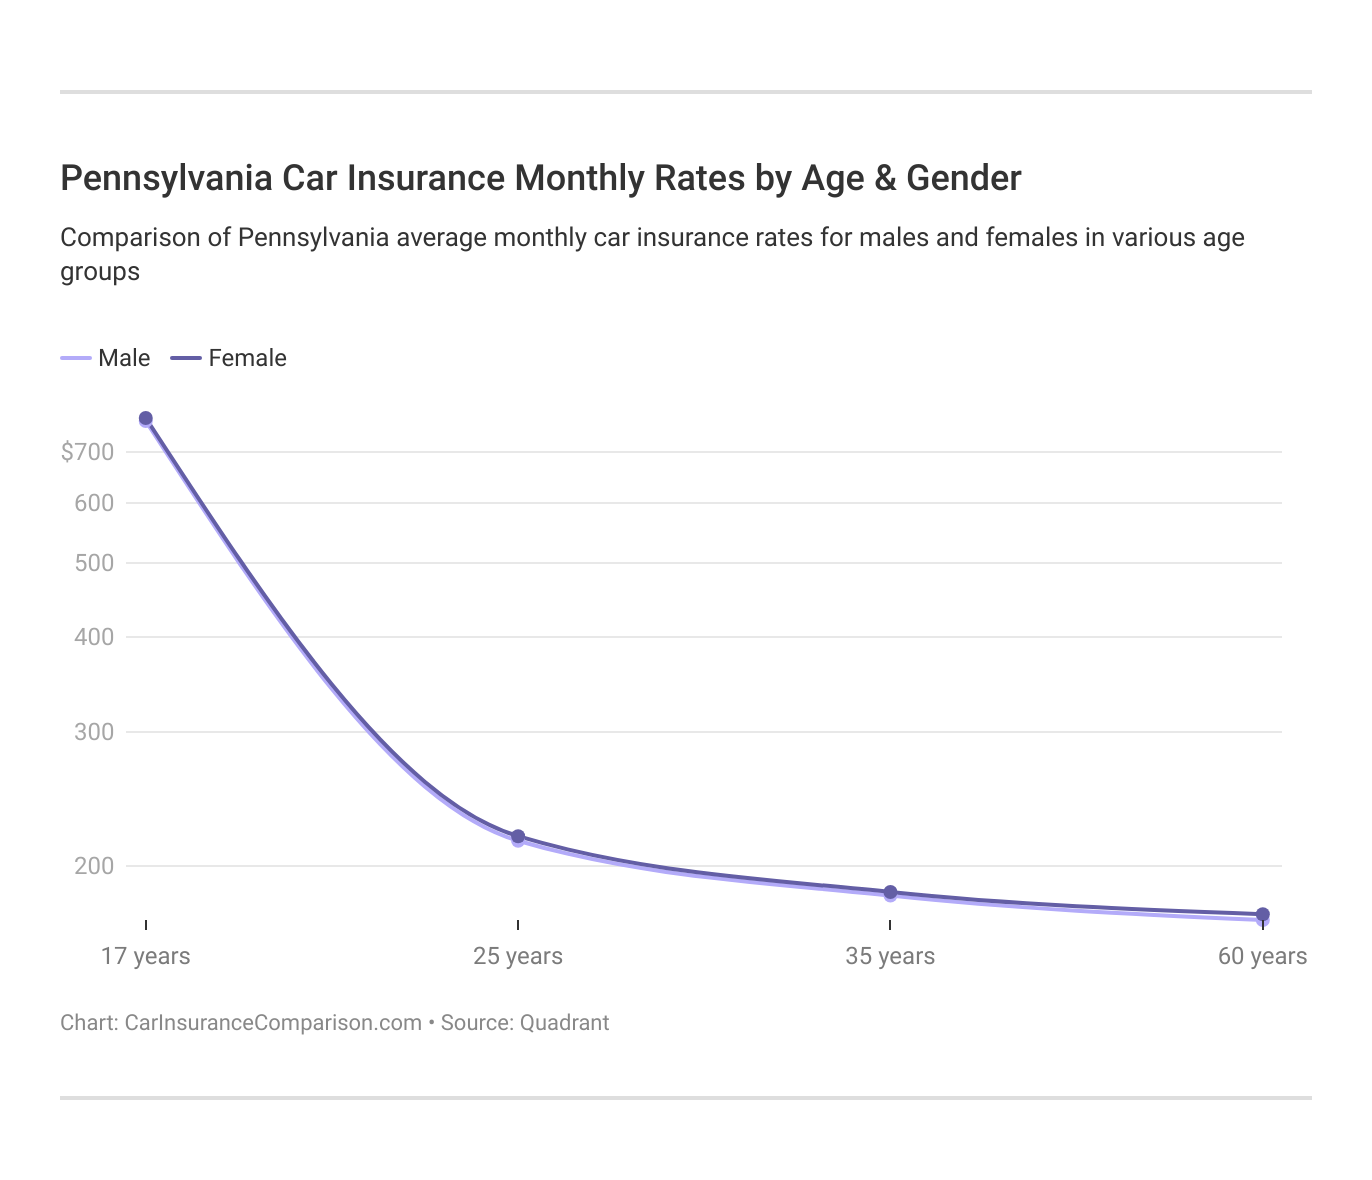 <h3>Pennsylvania Car Insurance Monthly Rates by Age & Gender</h3>